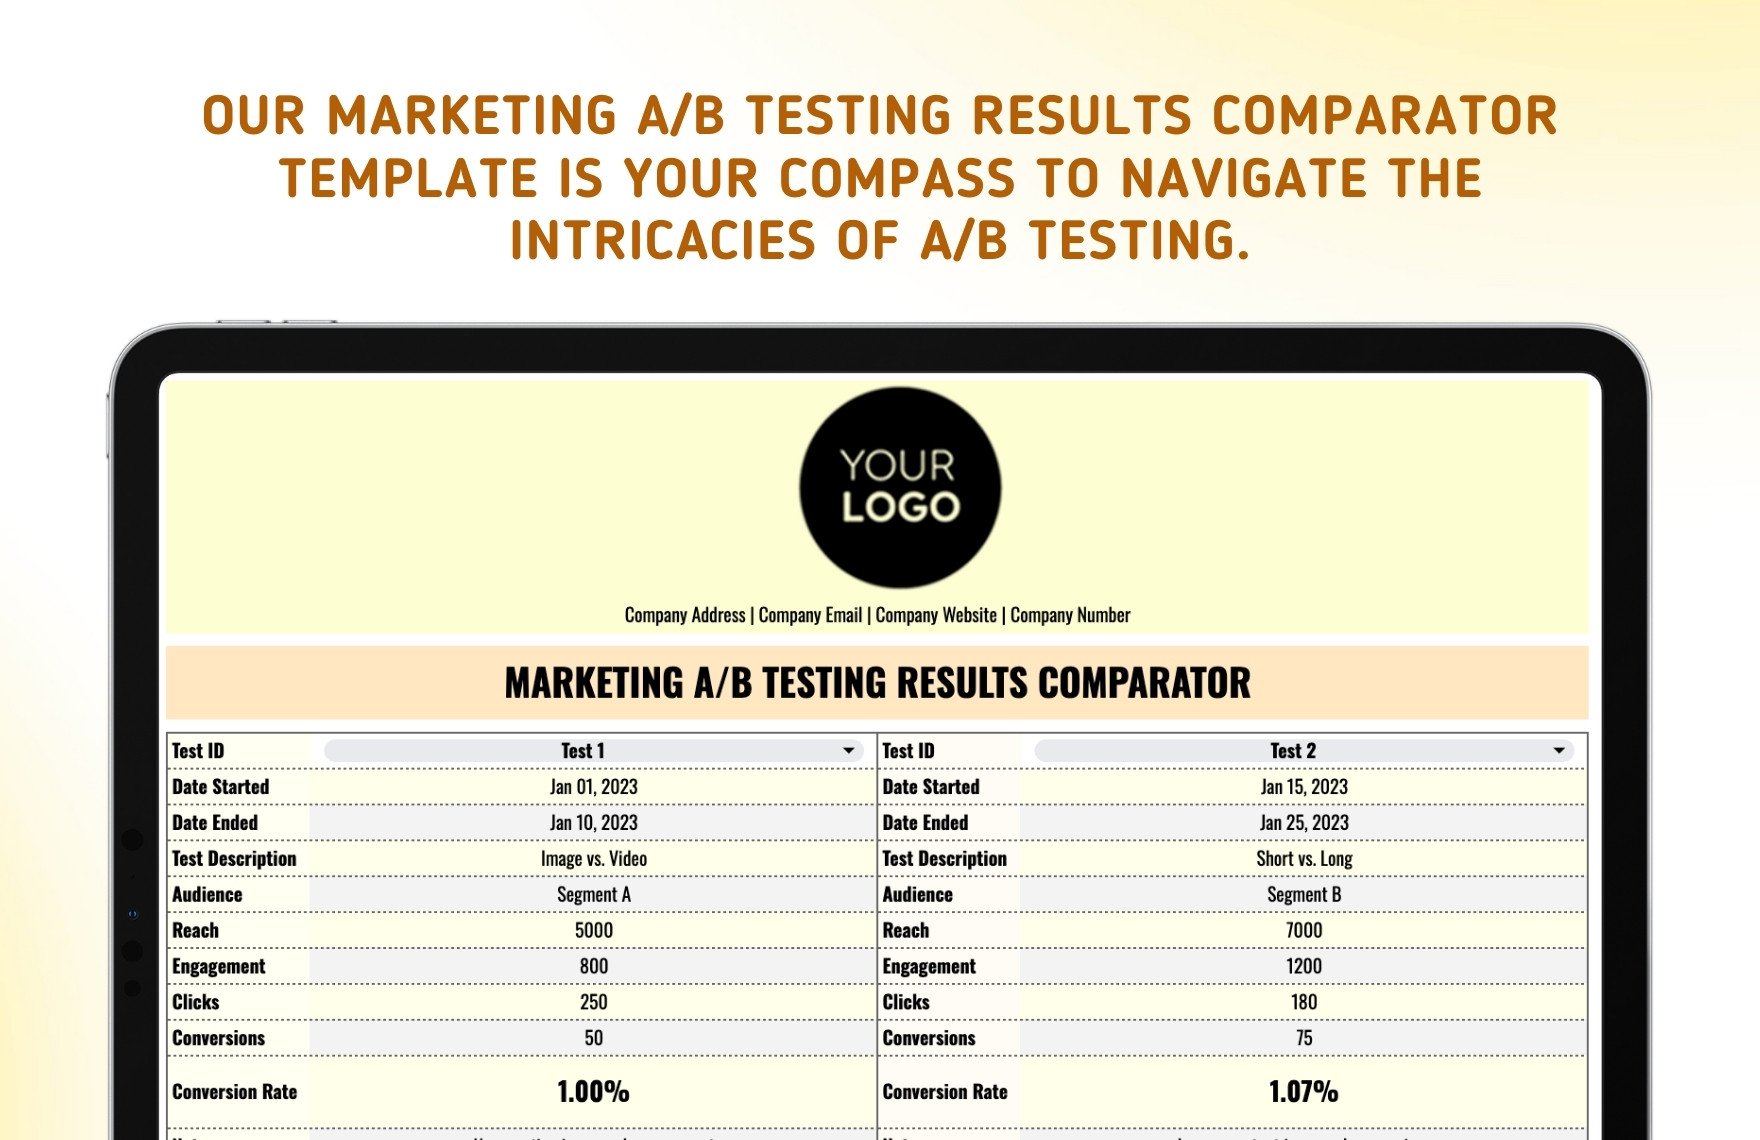 Marketing A/B Testing Results Comparator Template